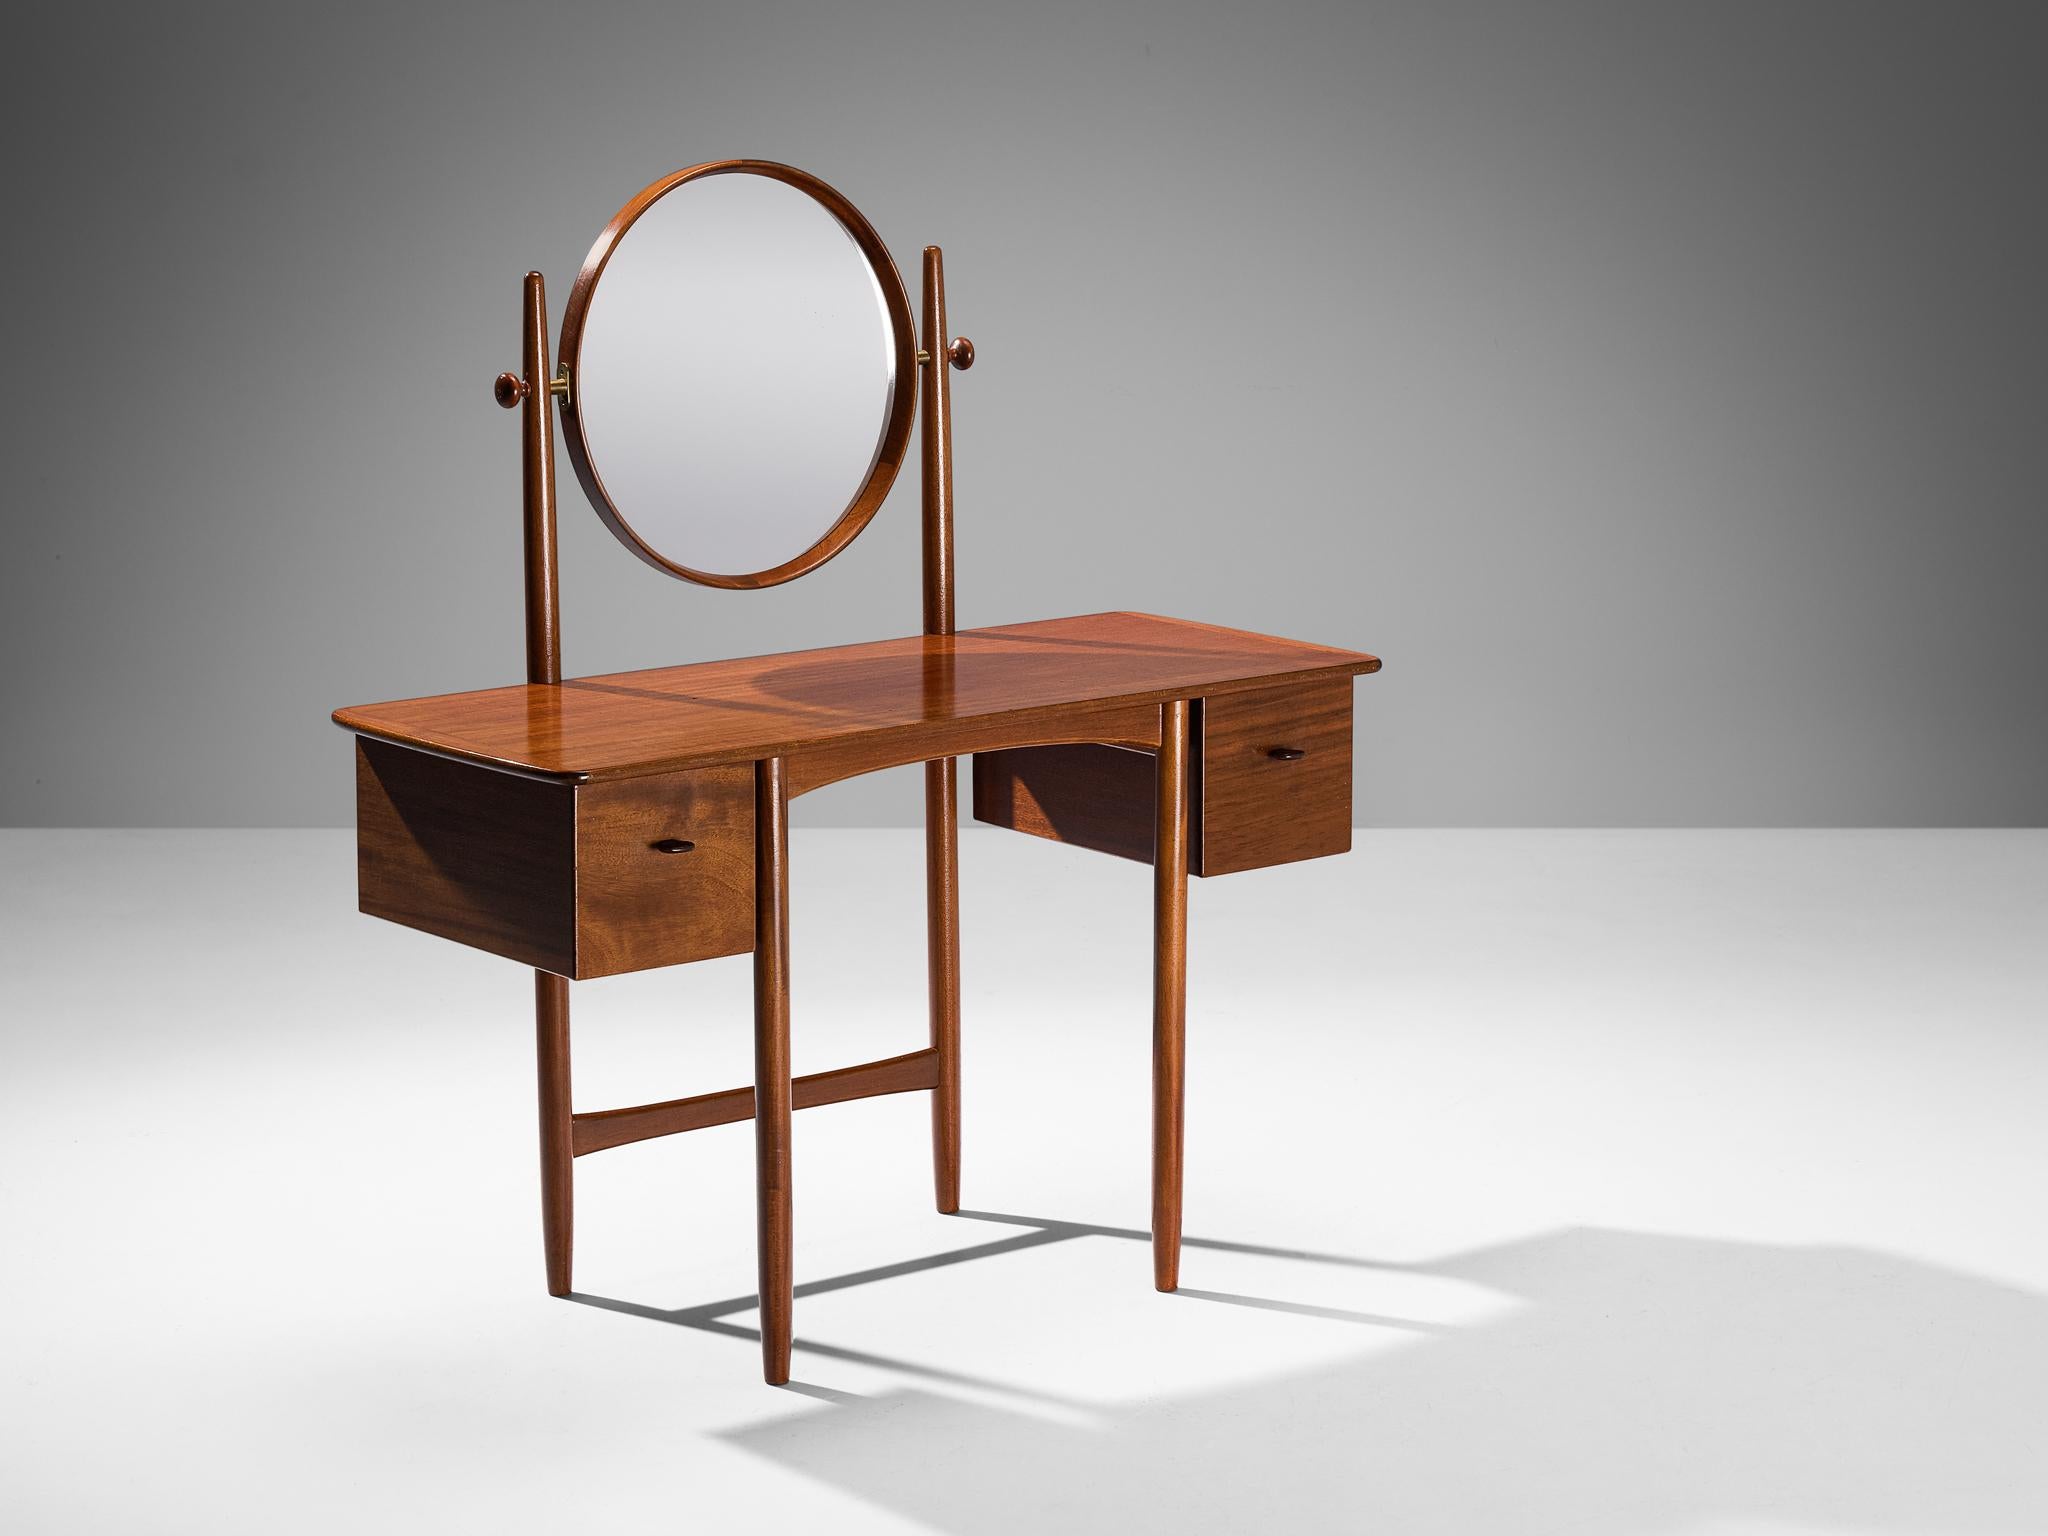 Sven Engström & Gunnar Myrstrand for SMF Svenska Möbelfabriken Bodafors, vanity table, mahogany, mirror, Sweden, 1960s

This elegant vanity table combines simplicity with style in a superb manner. Executed in a sophisticated mahogany, this piece